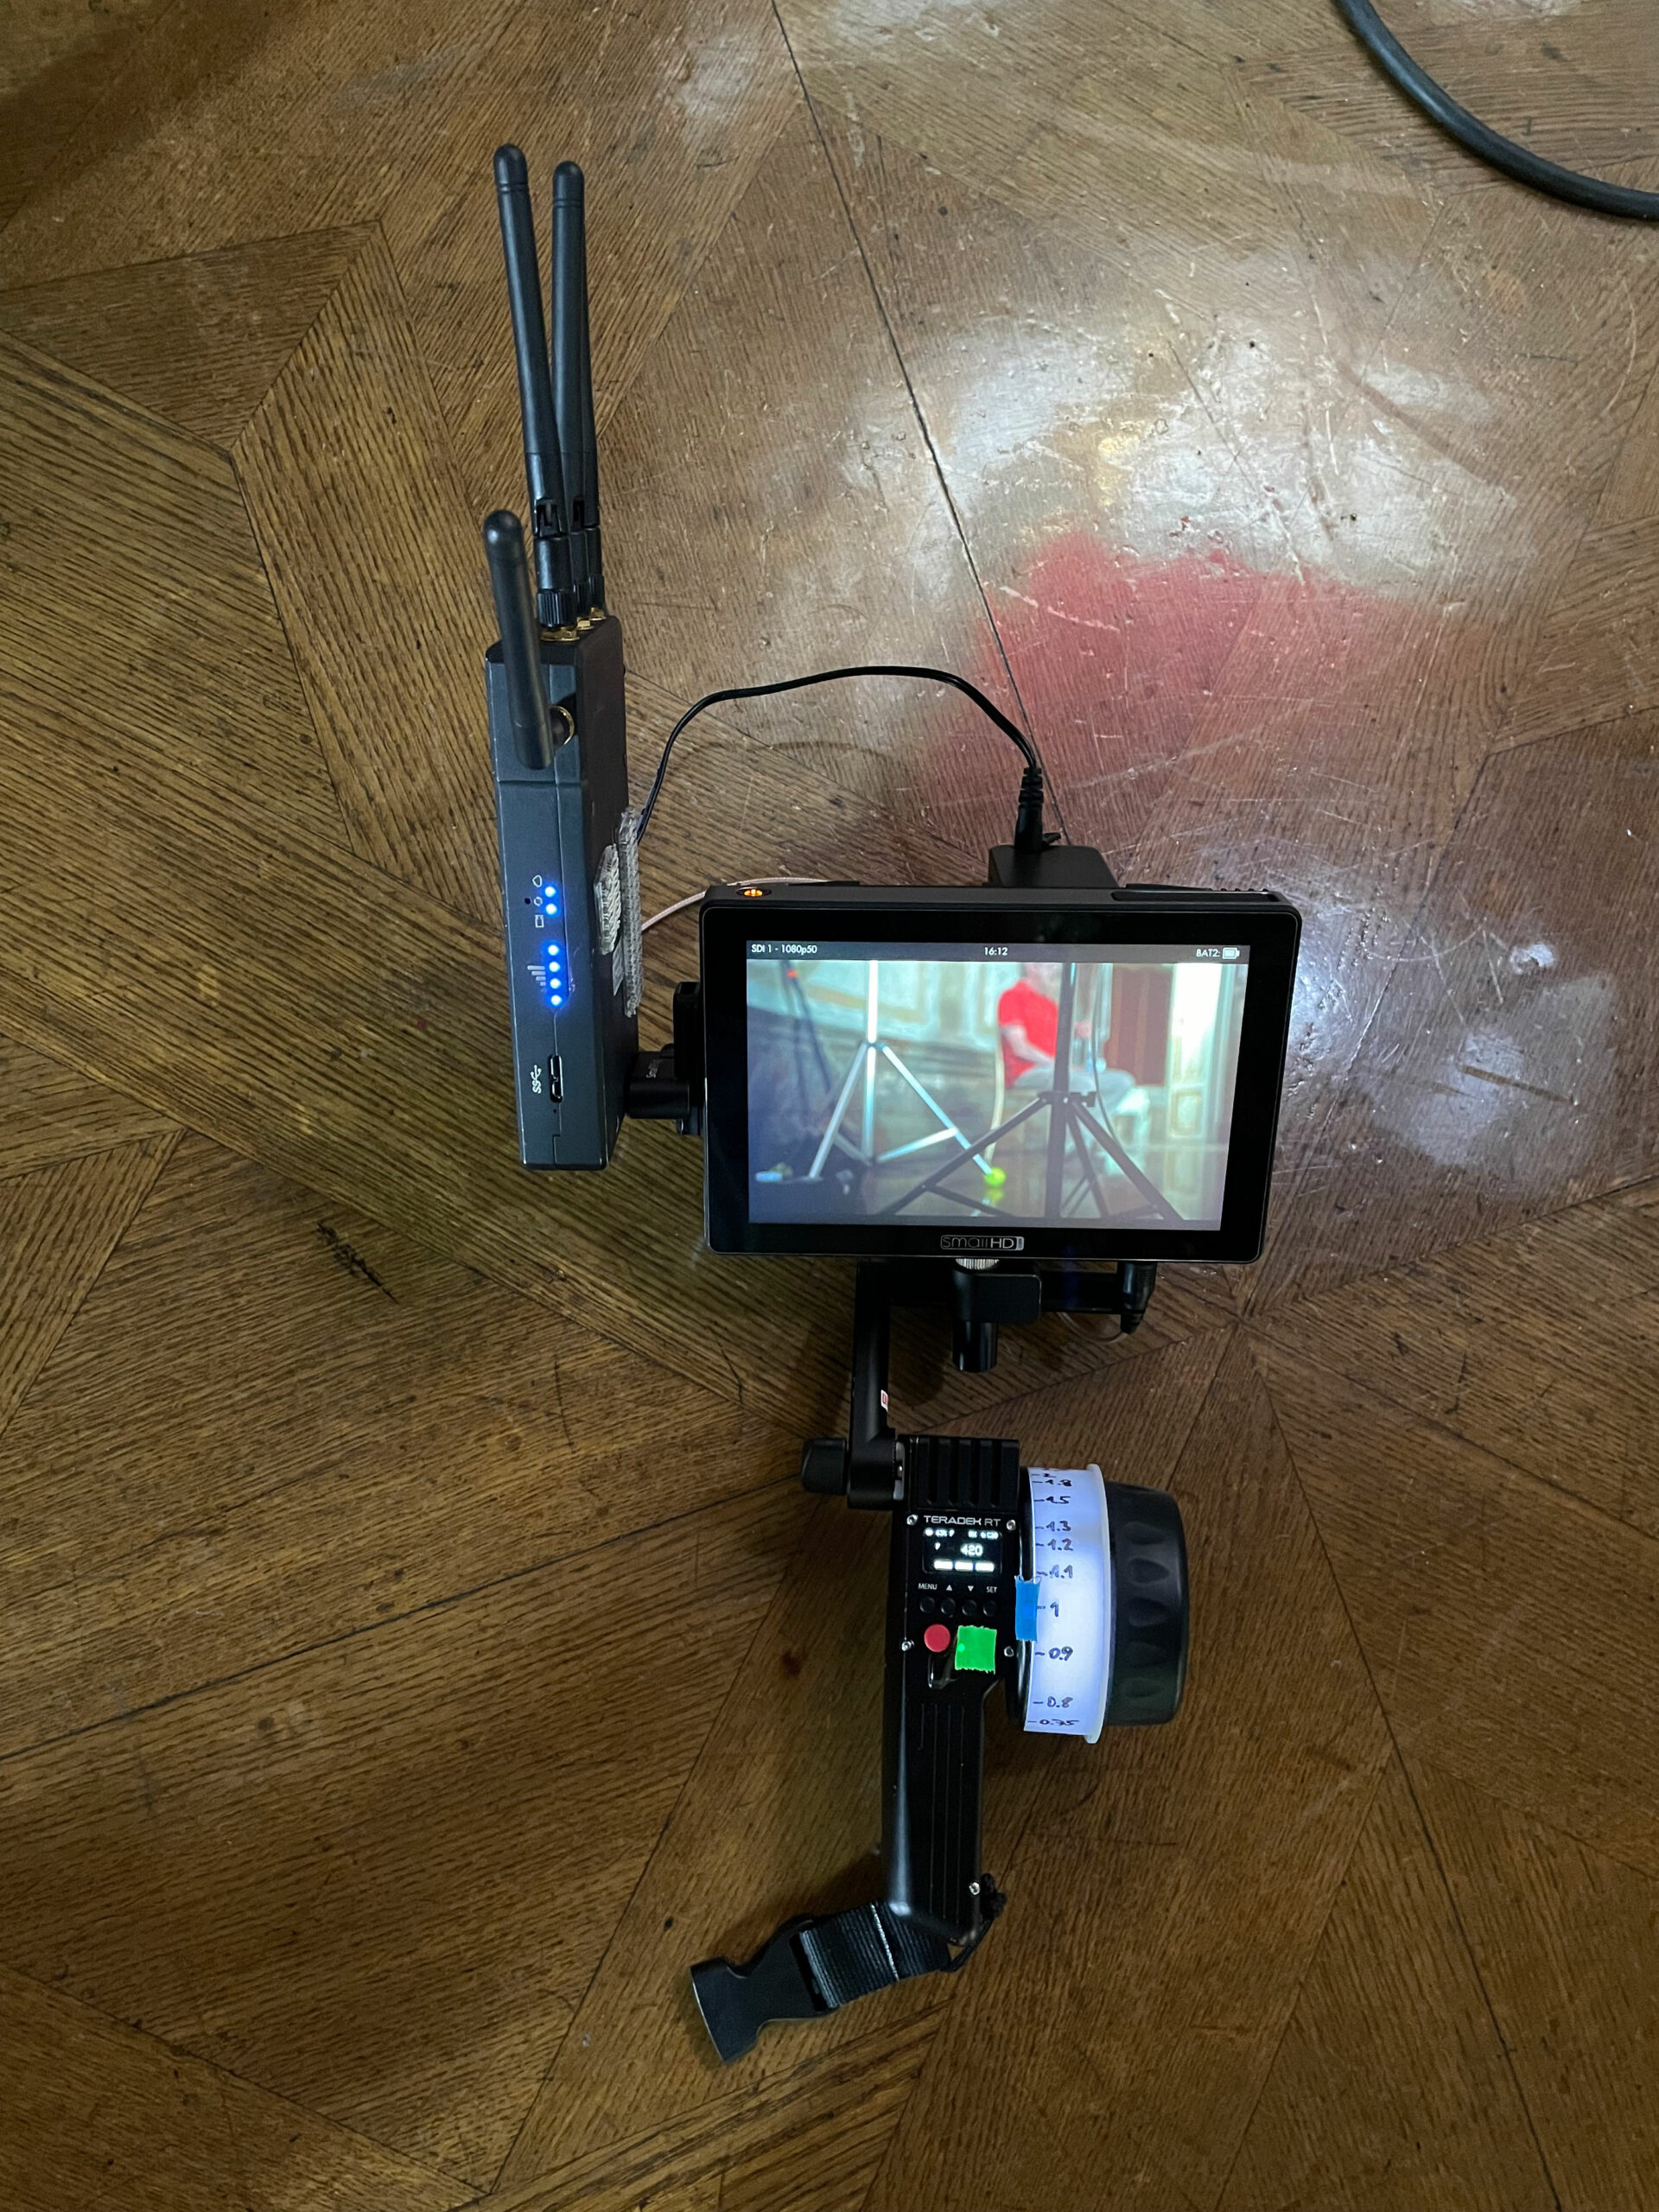 SmallHD 702 touch monitor with a Teradek wireless receiver attached to a Teradek RT wireless focus system hand unit